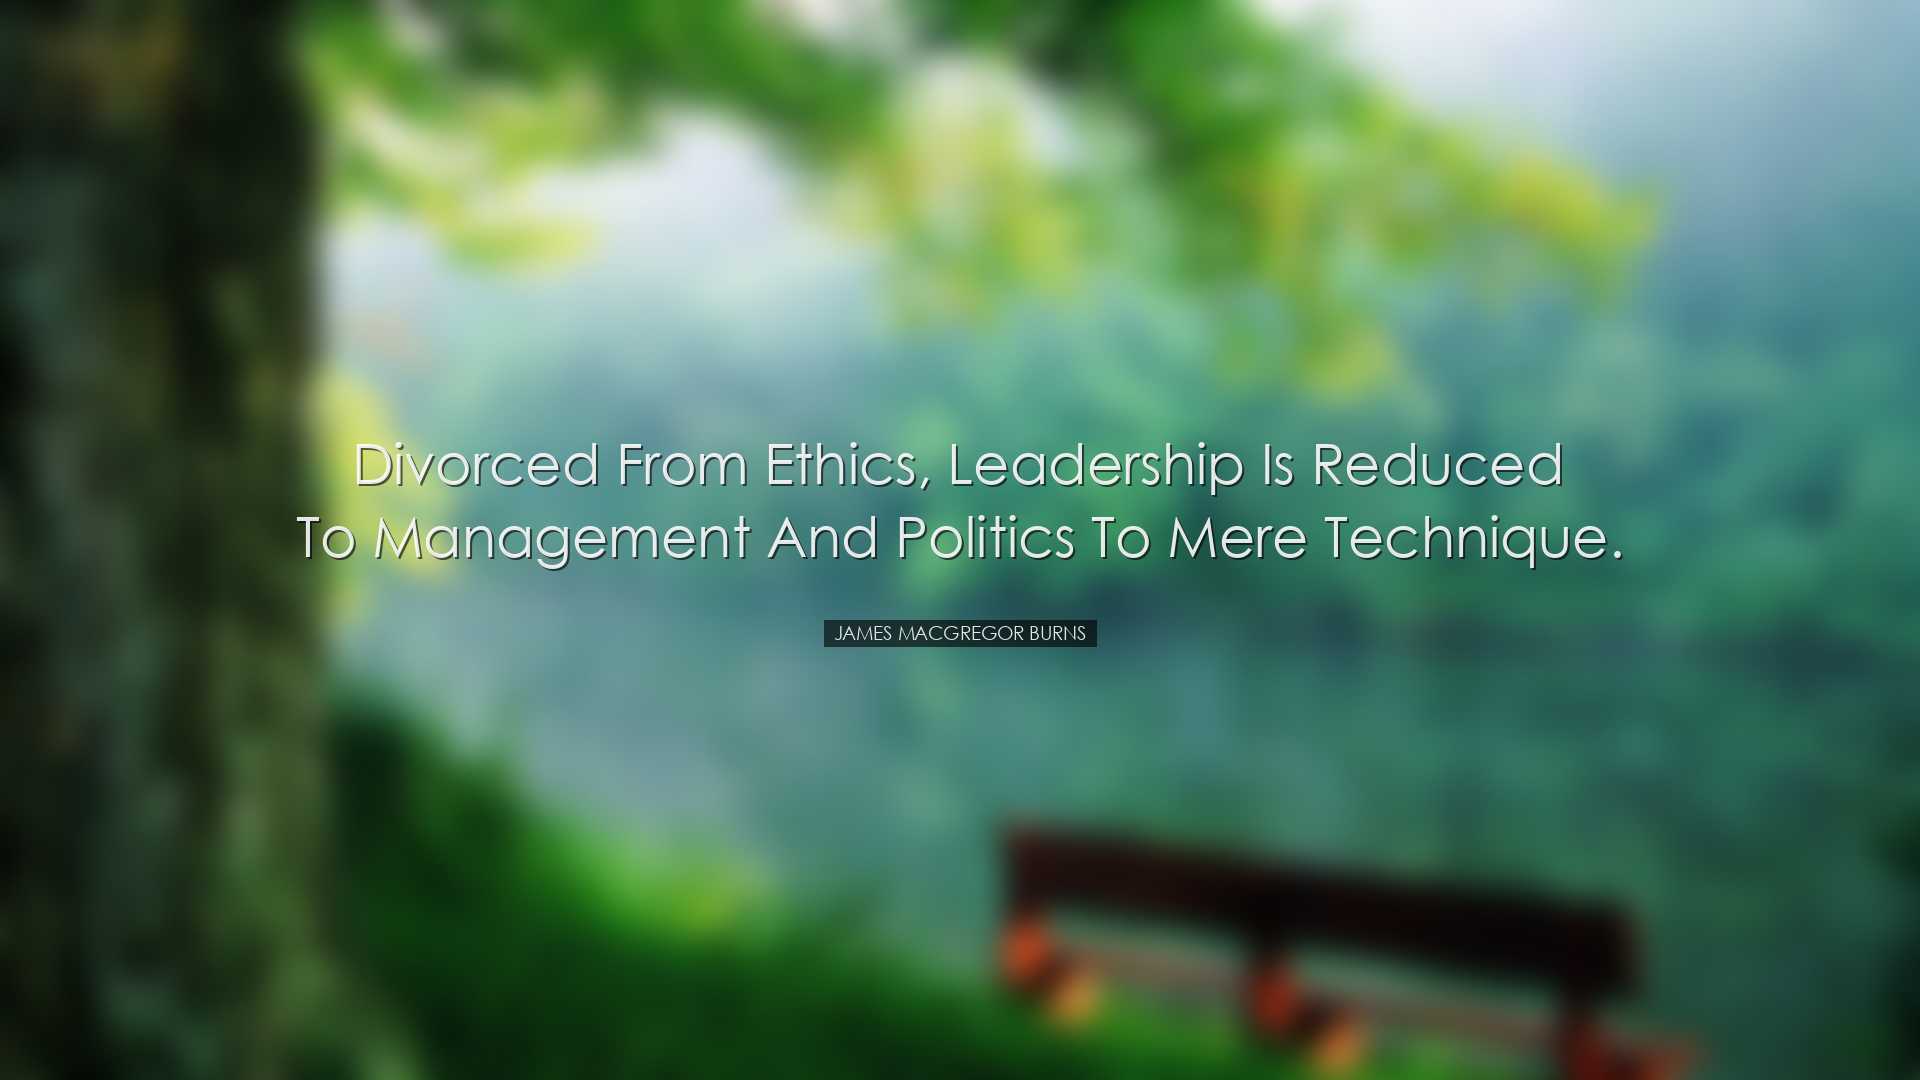 Divorced from ethics, leadership is reduced to management and poli